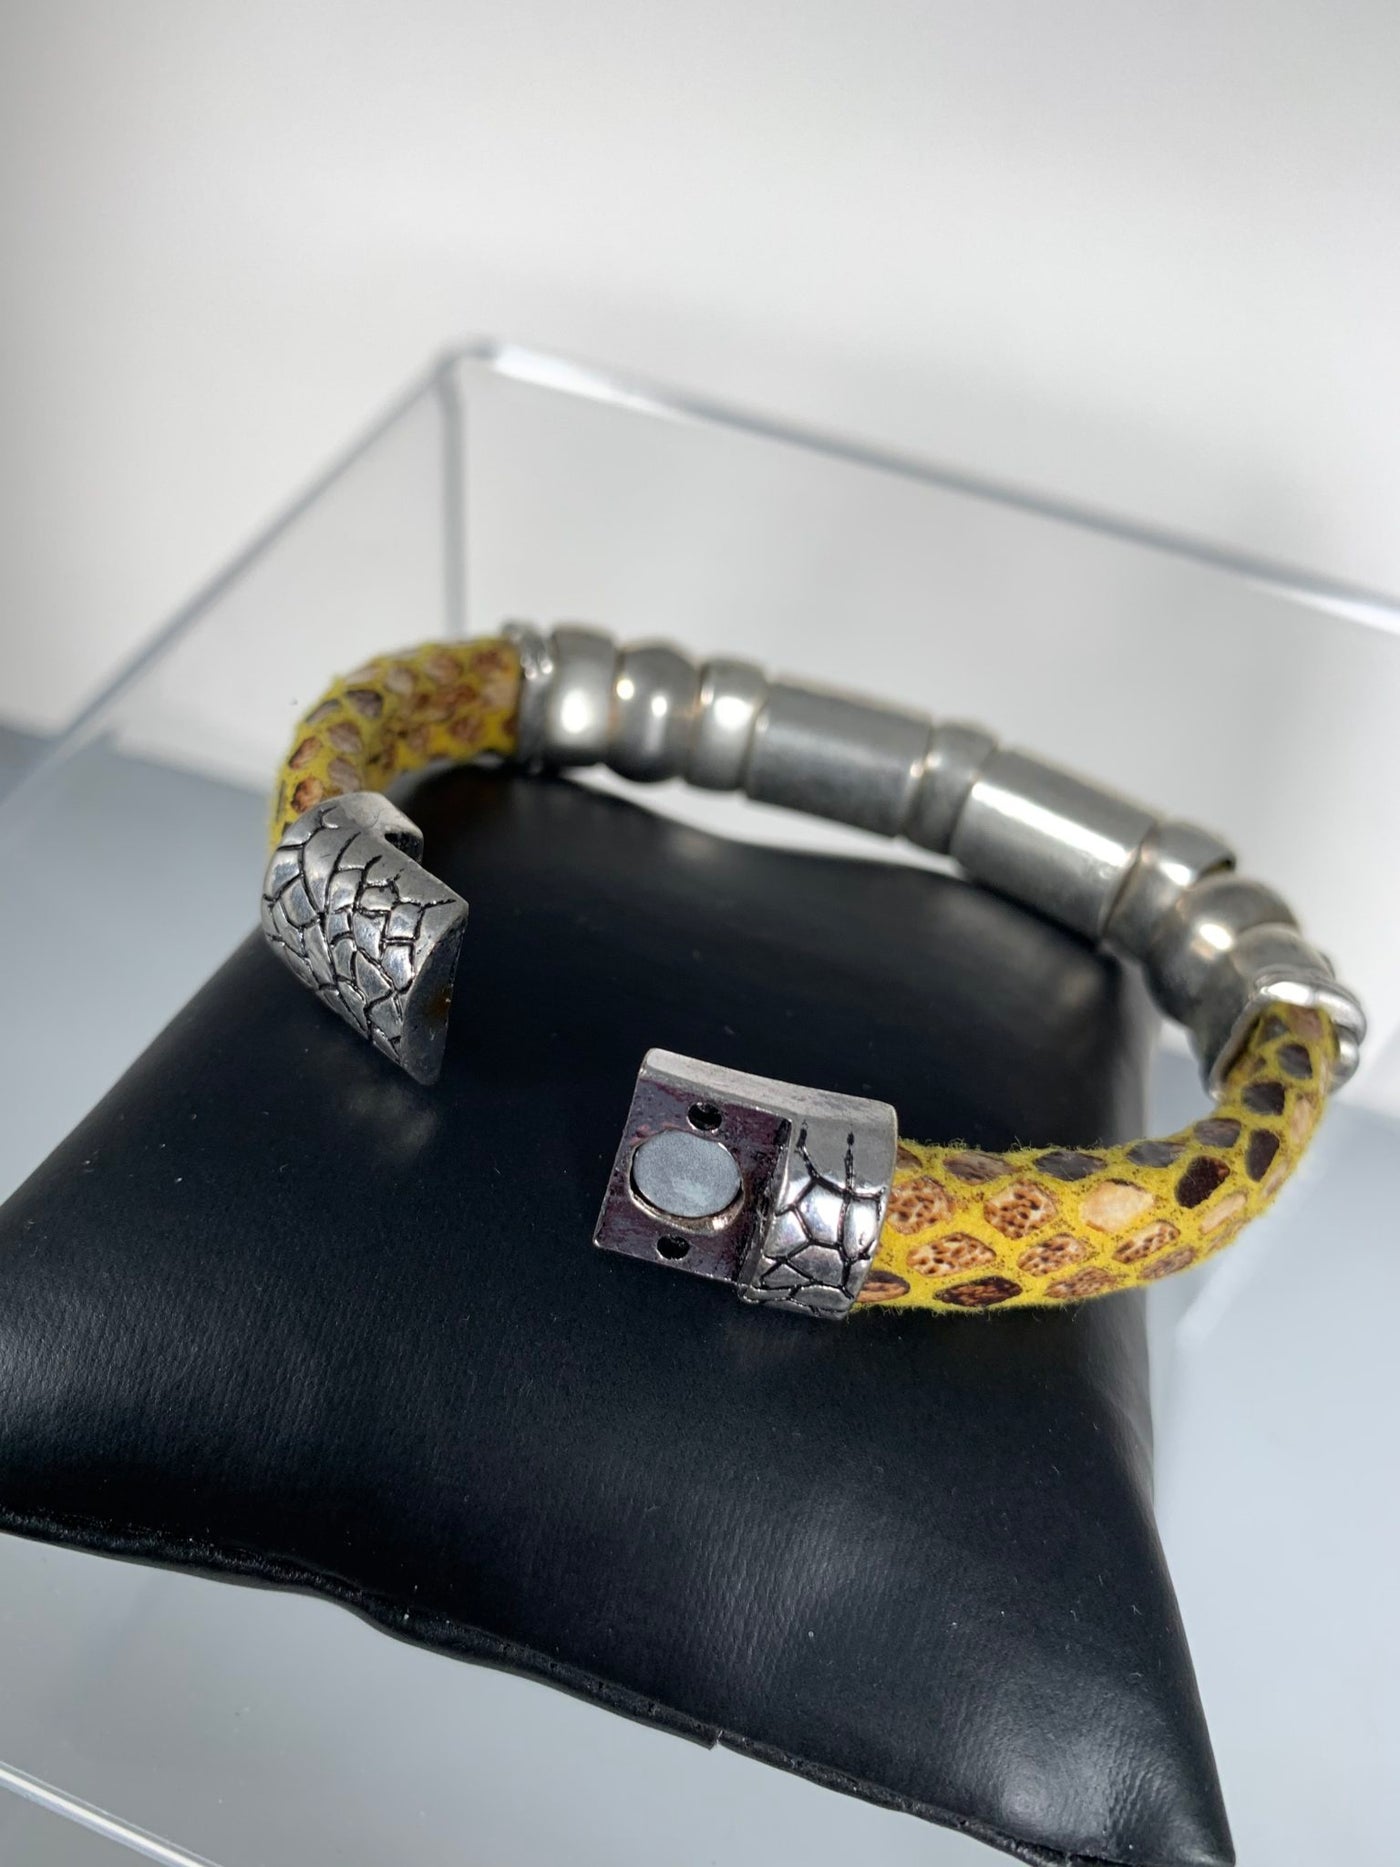 Yellow Faux Snake Skin Band Bracelet Featuring 3 "Little People"